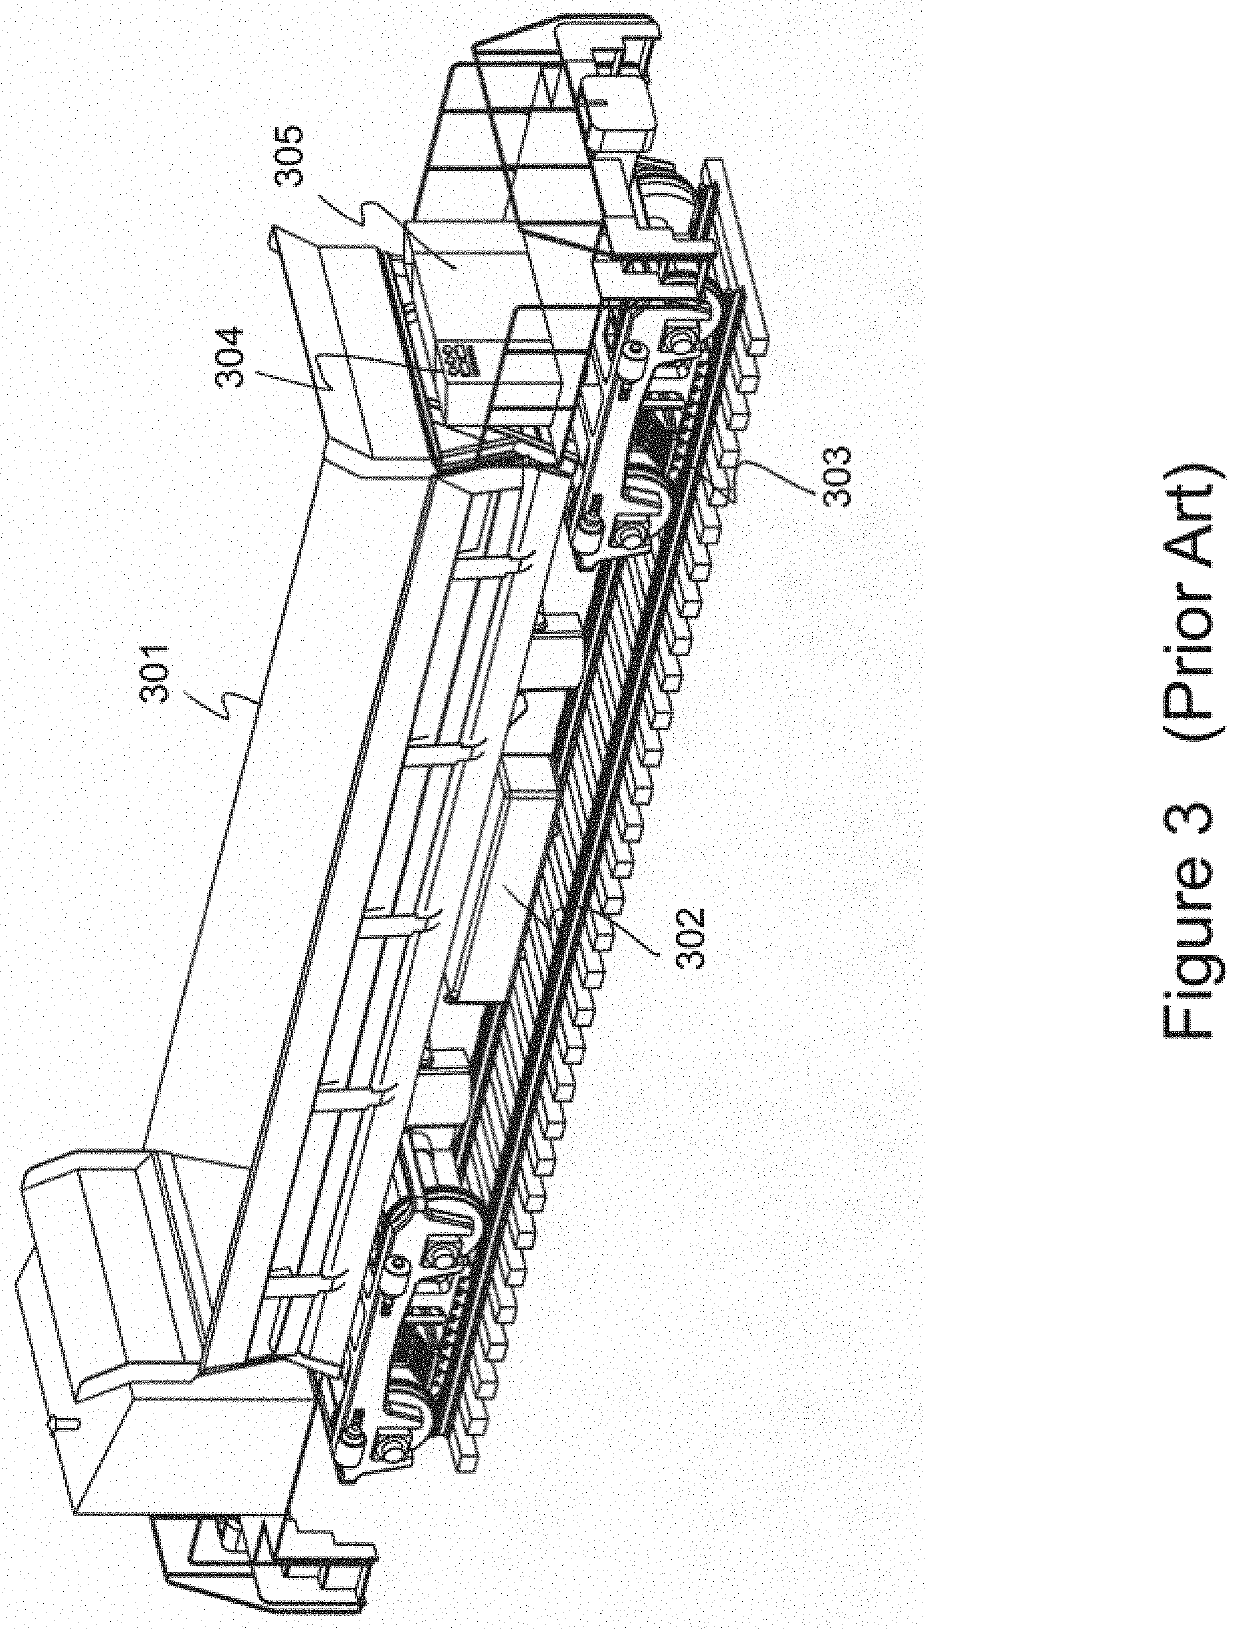 Remote operation of a powered burden rail car